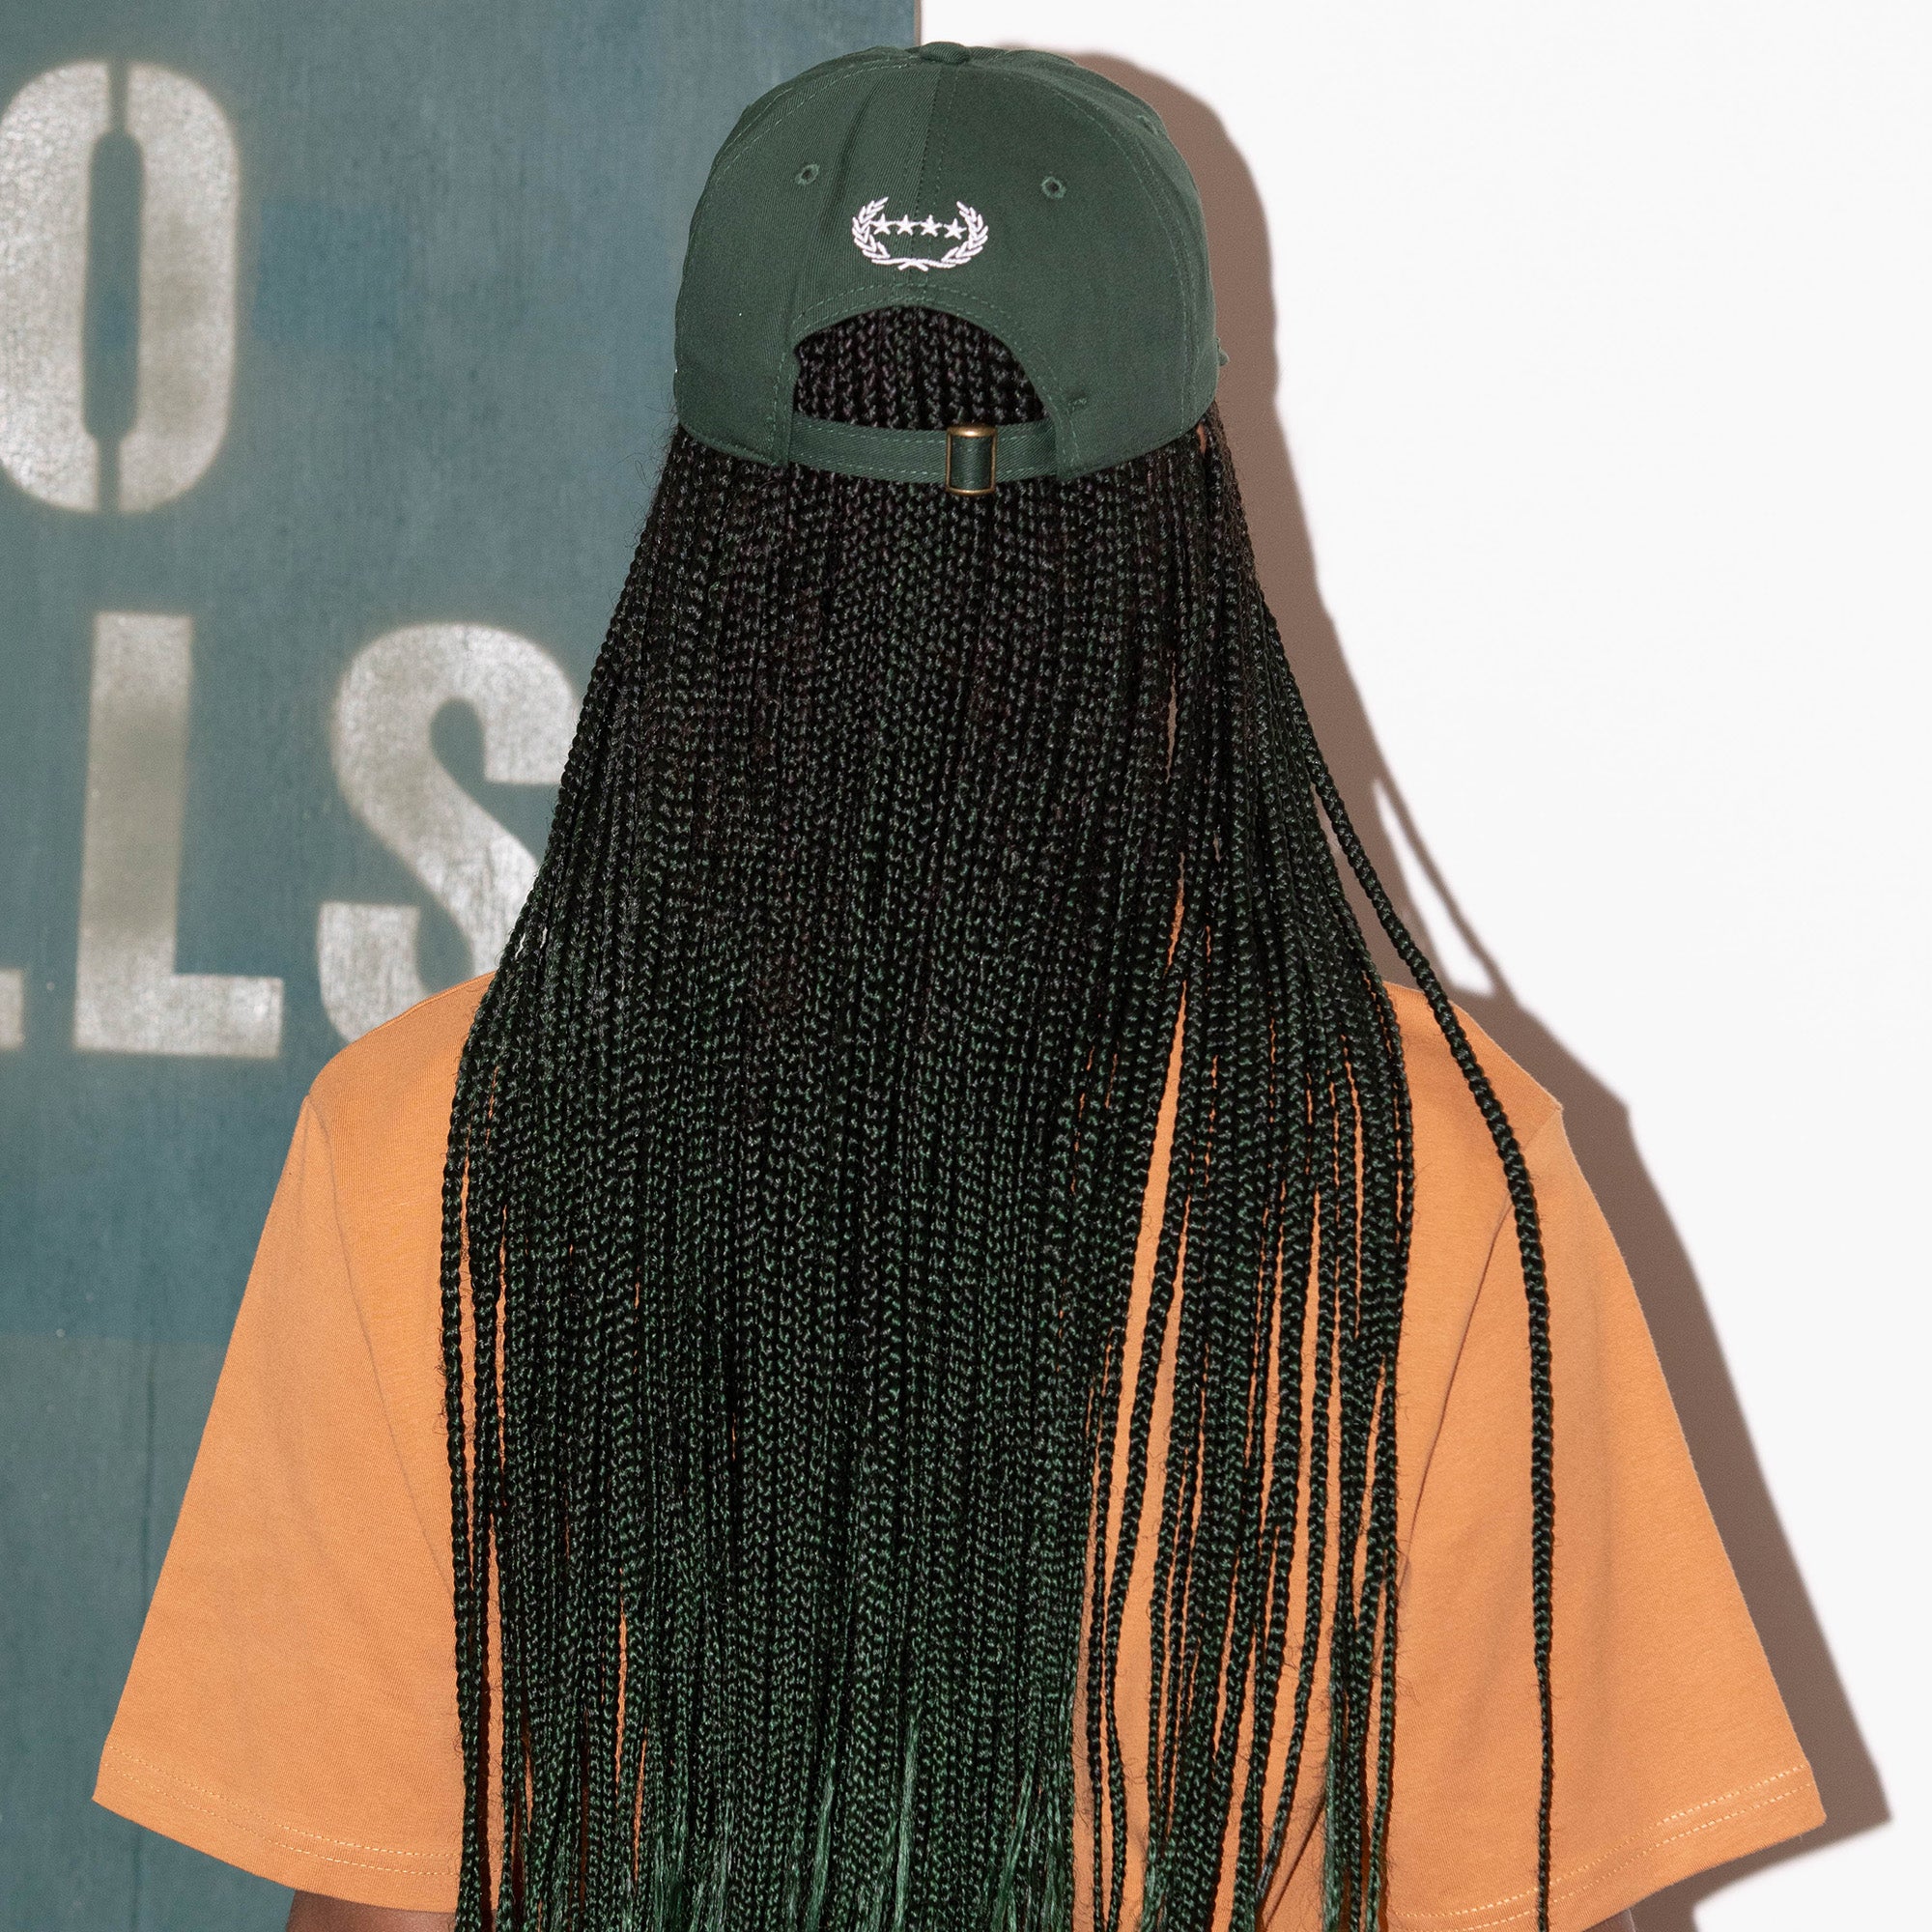 TRUST NO ONE FG GREEN RELAXED FIT HAT